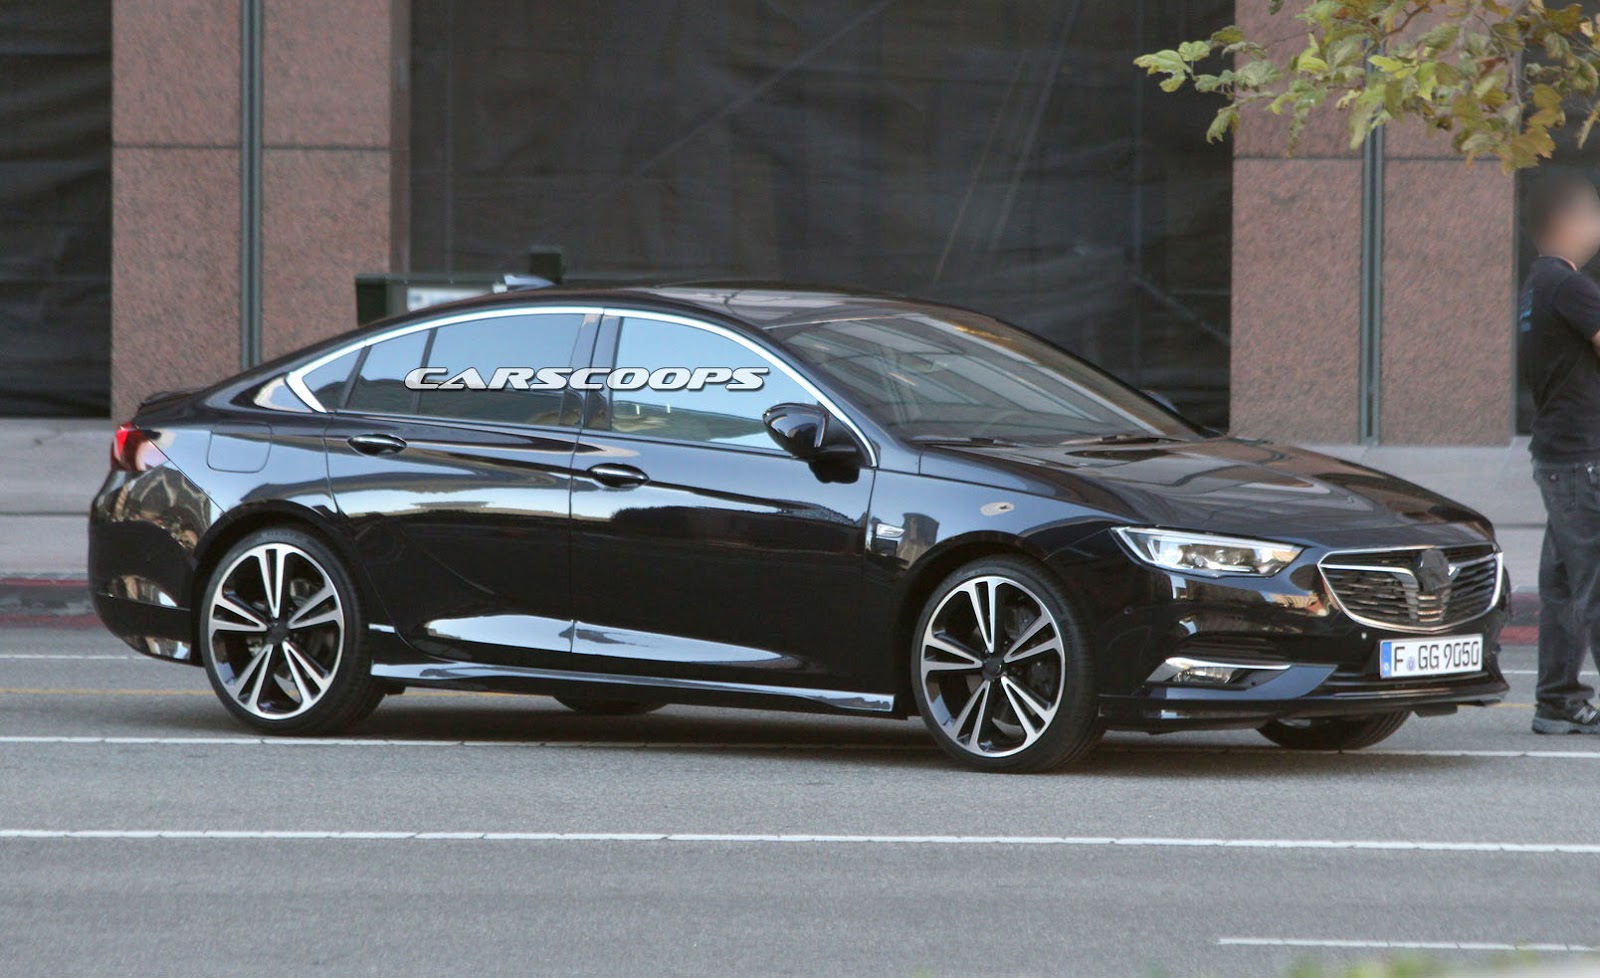 Officially Official: Opel Insignia revealed - Autoblog